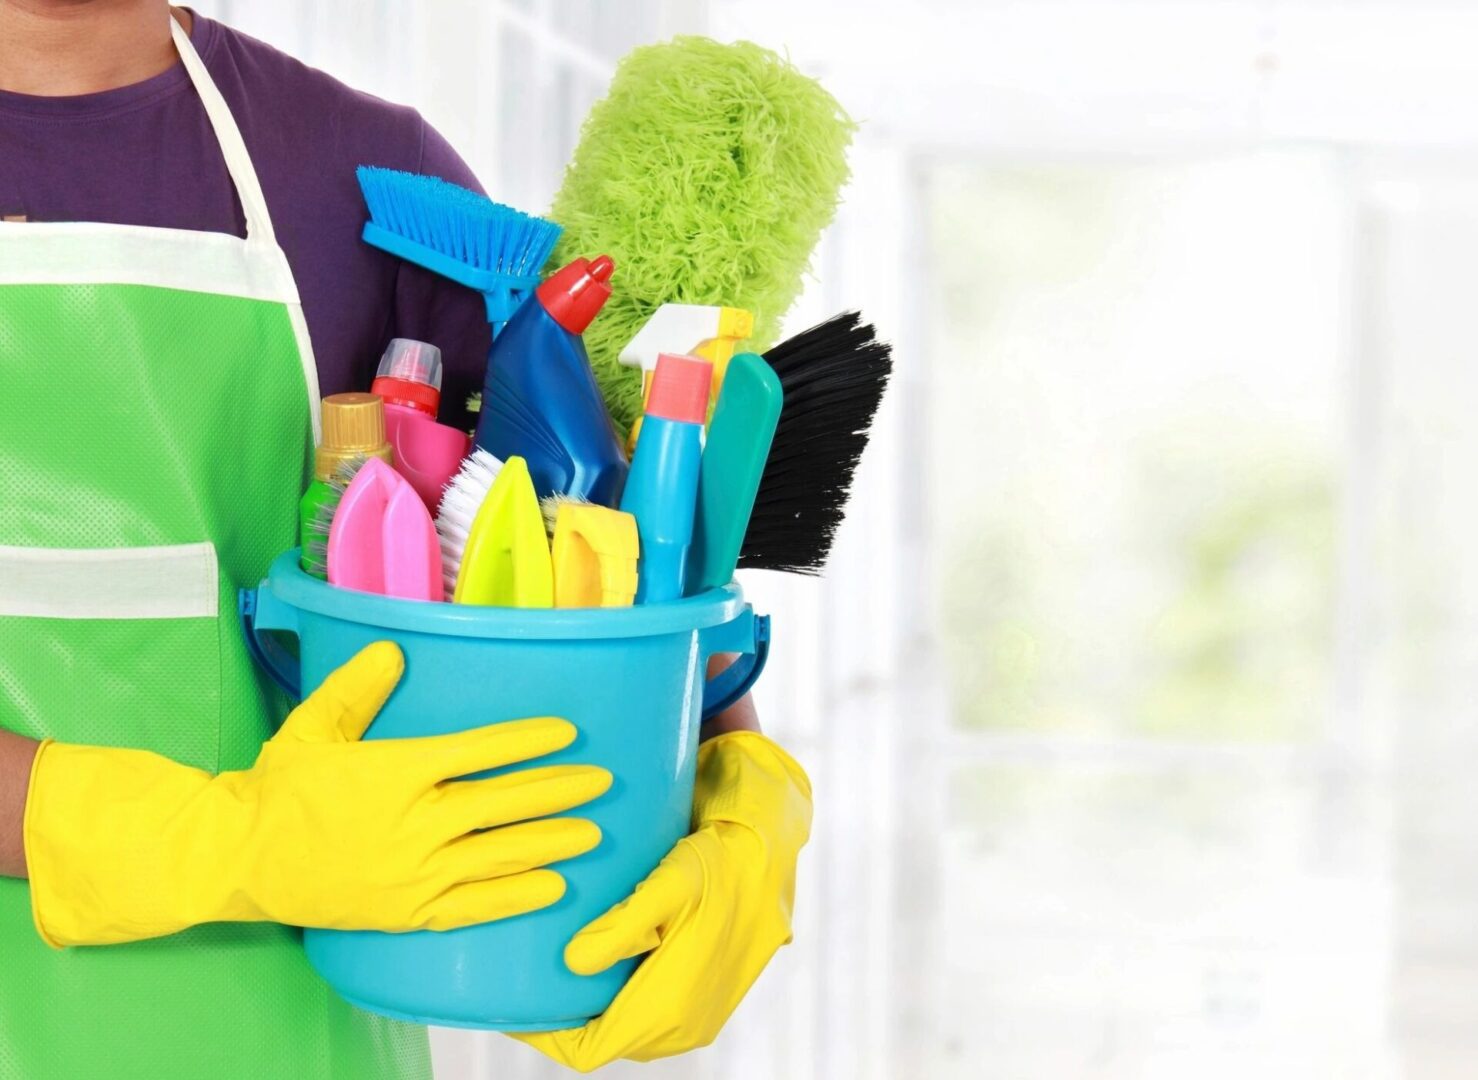 Nylon Household Cleaning Brushes Market: A Comprehensive Overview